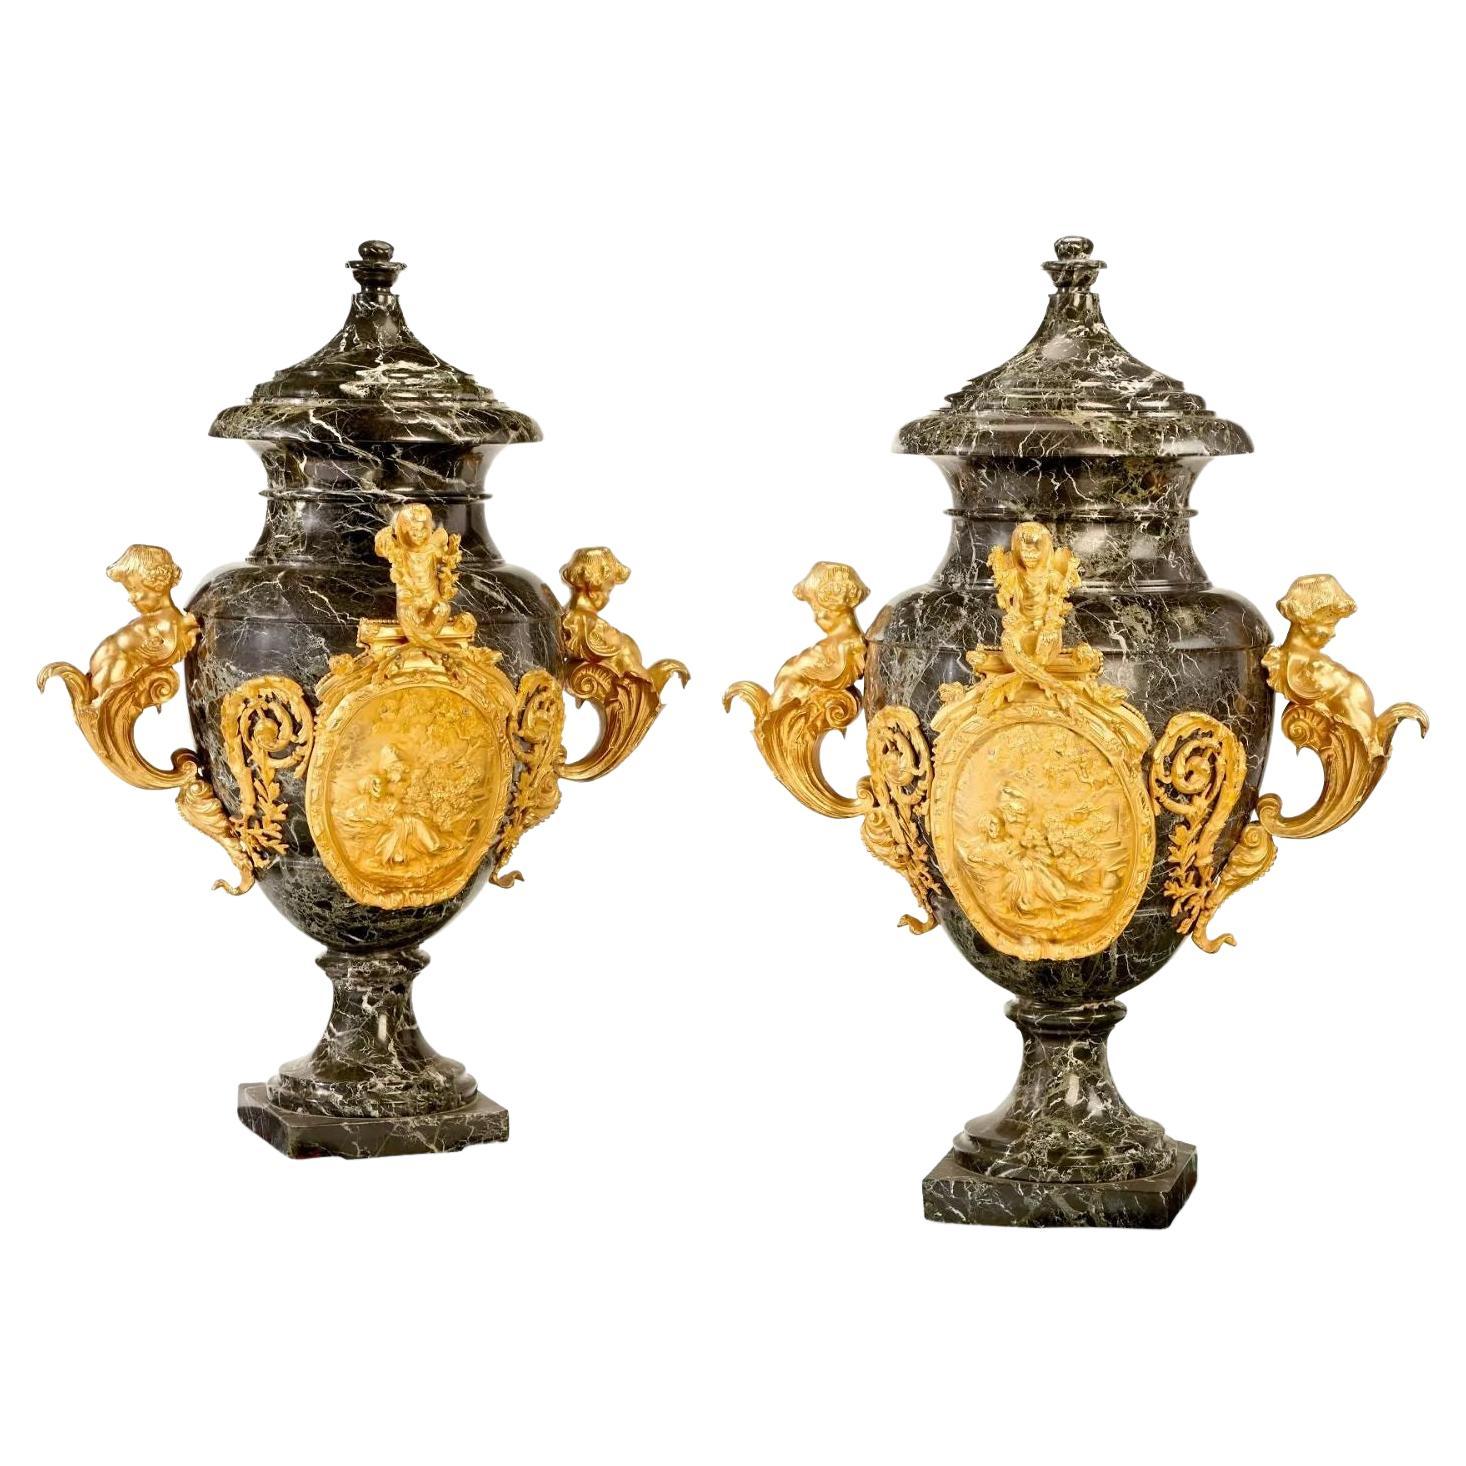 Pair of Late 19th Century Marble Gilt-Bronze Floor Urns For Sale